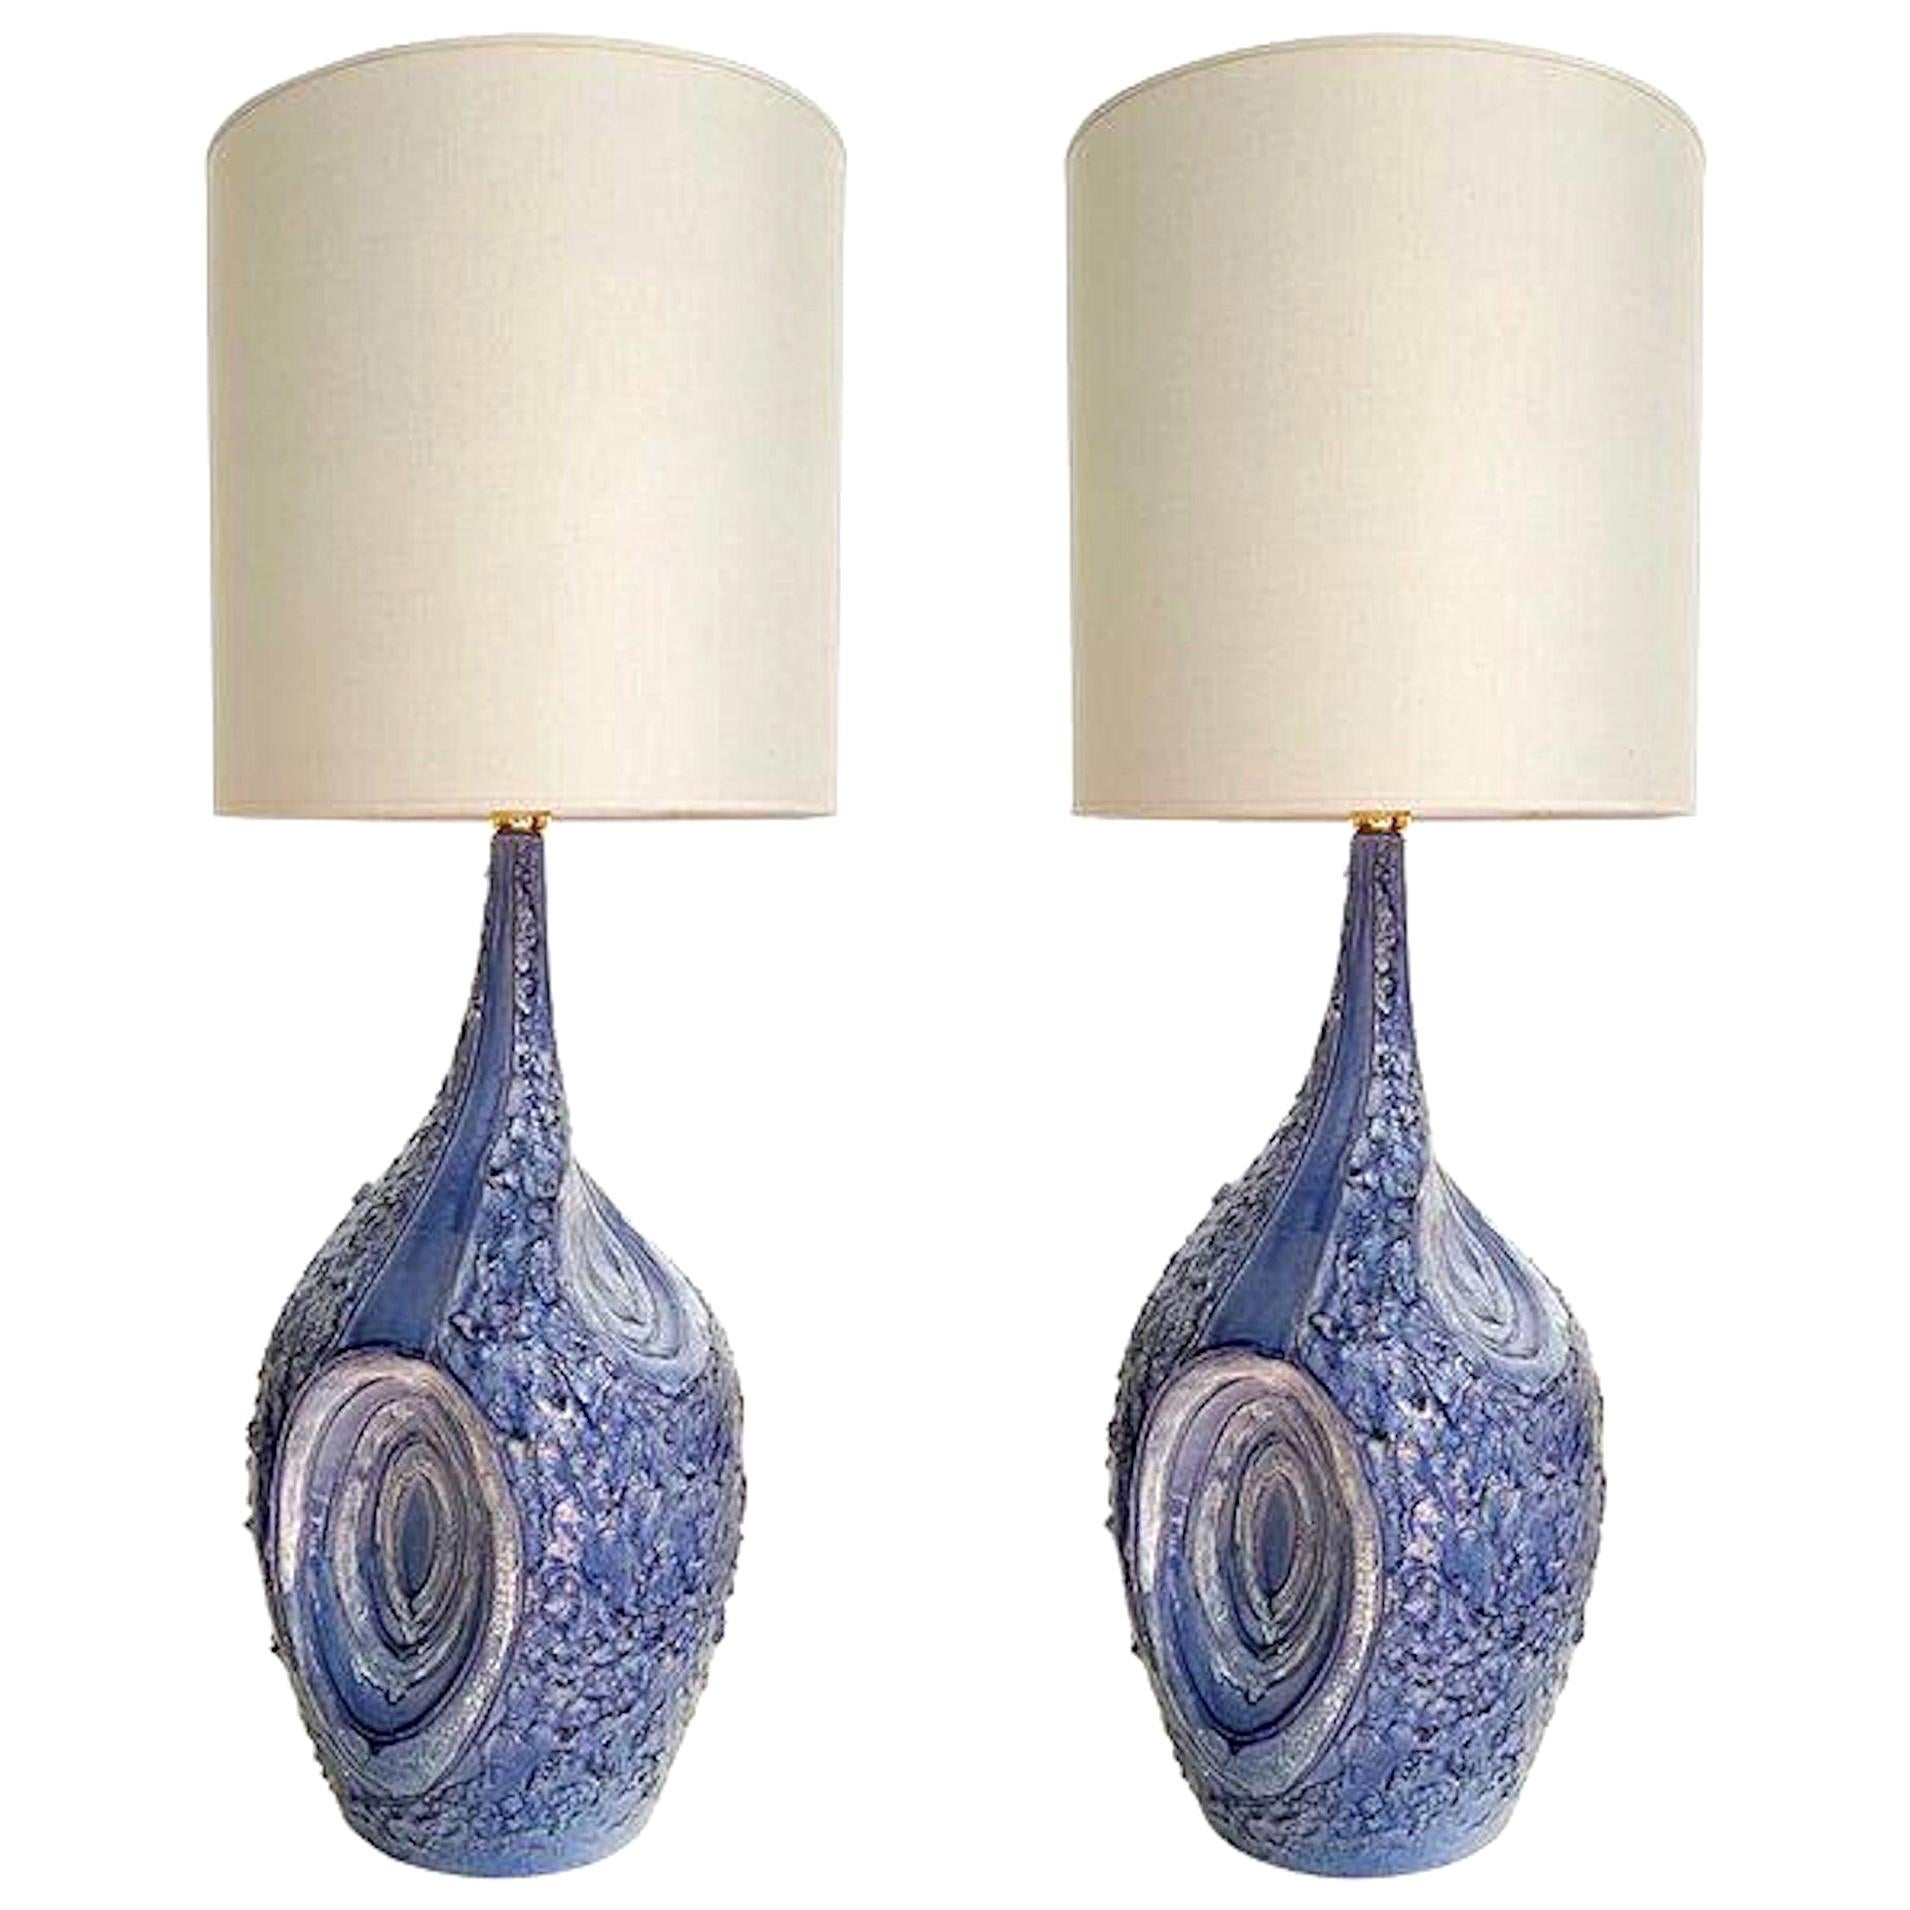 Large Textured Blue & White Ceramic Signed Italian Mid-Century Mod Table Lamps 